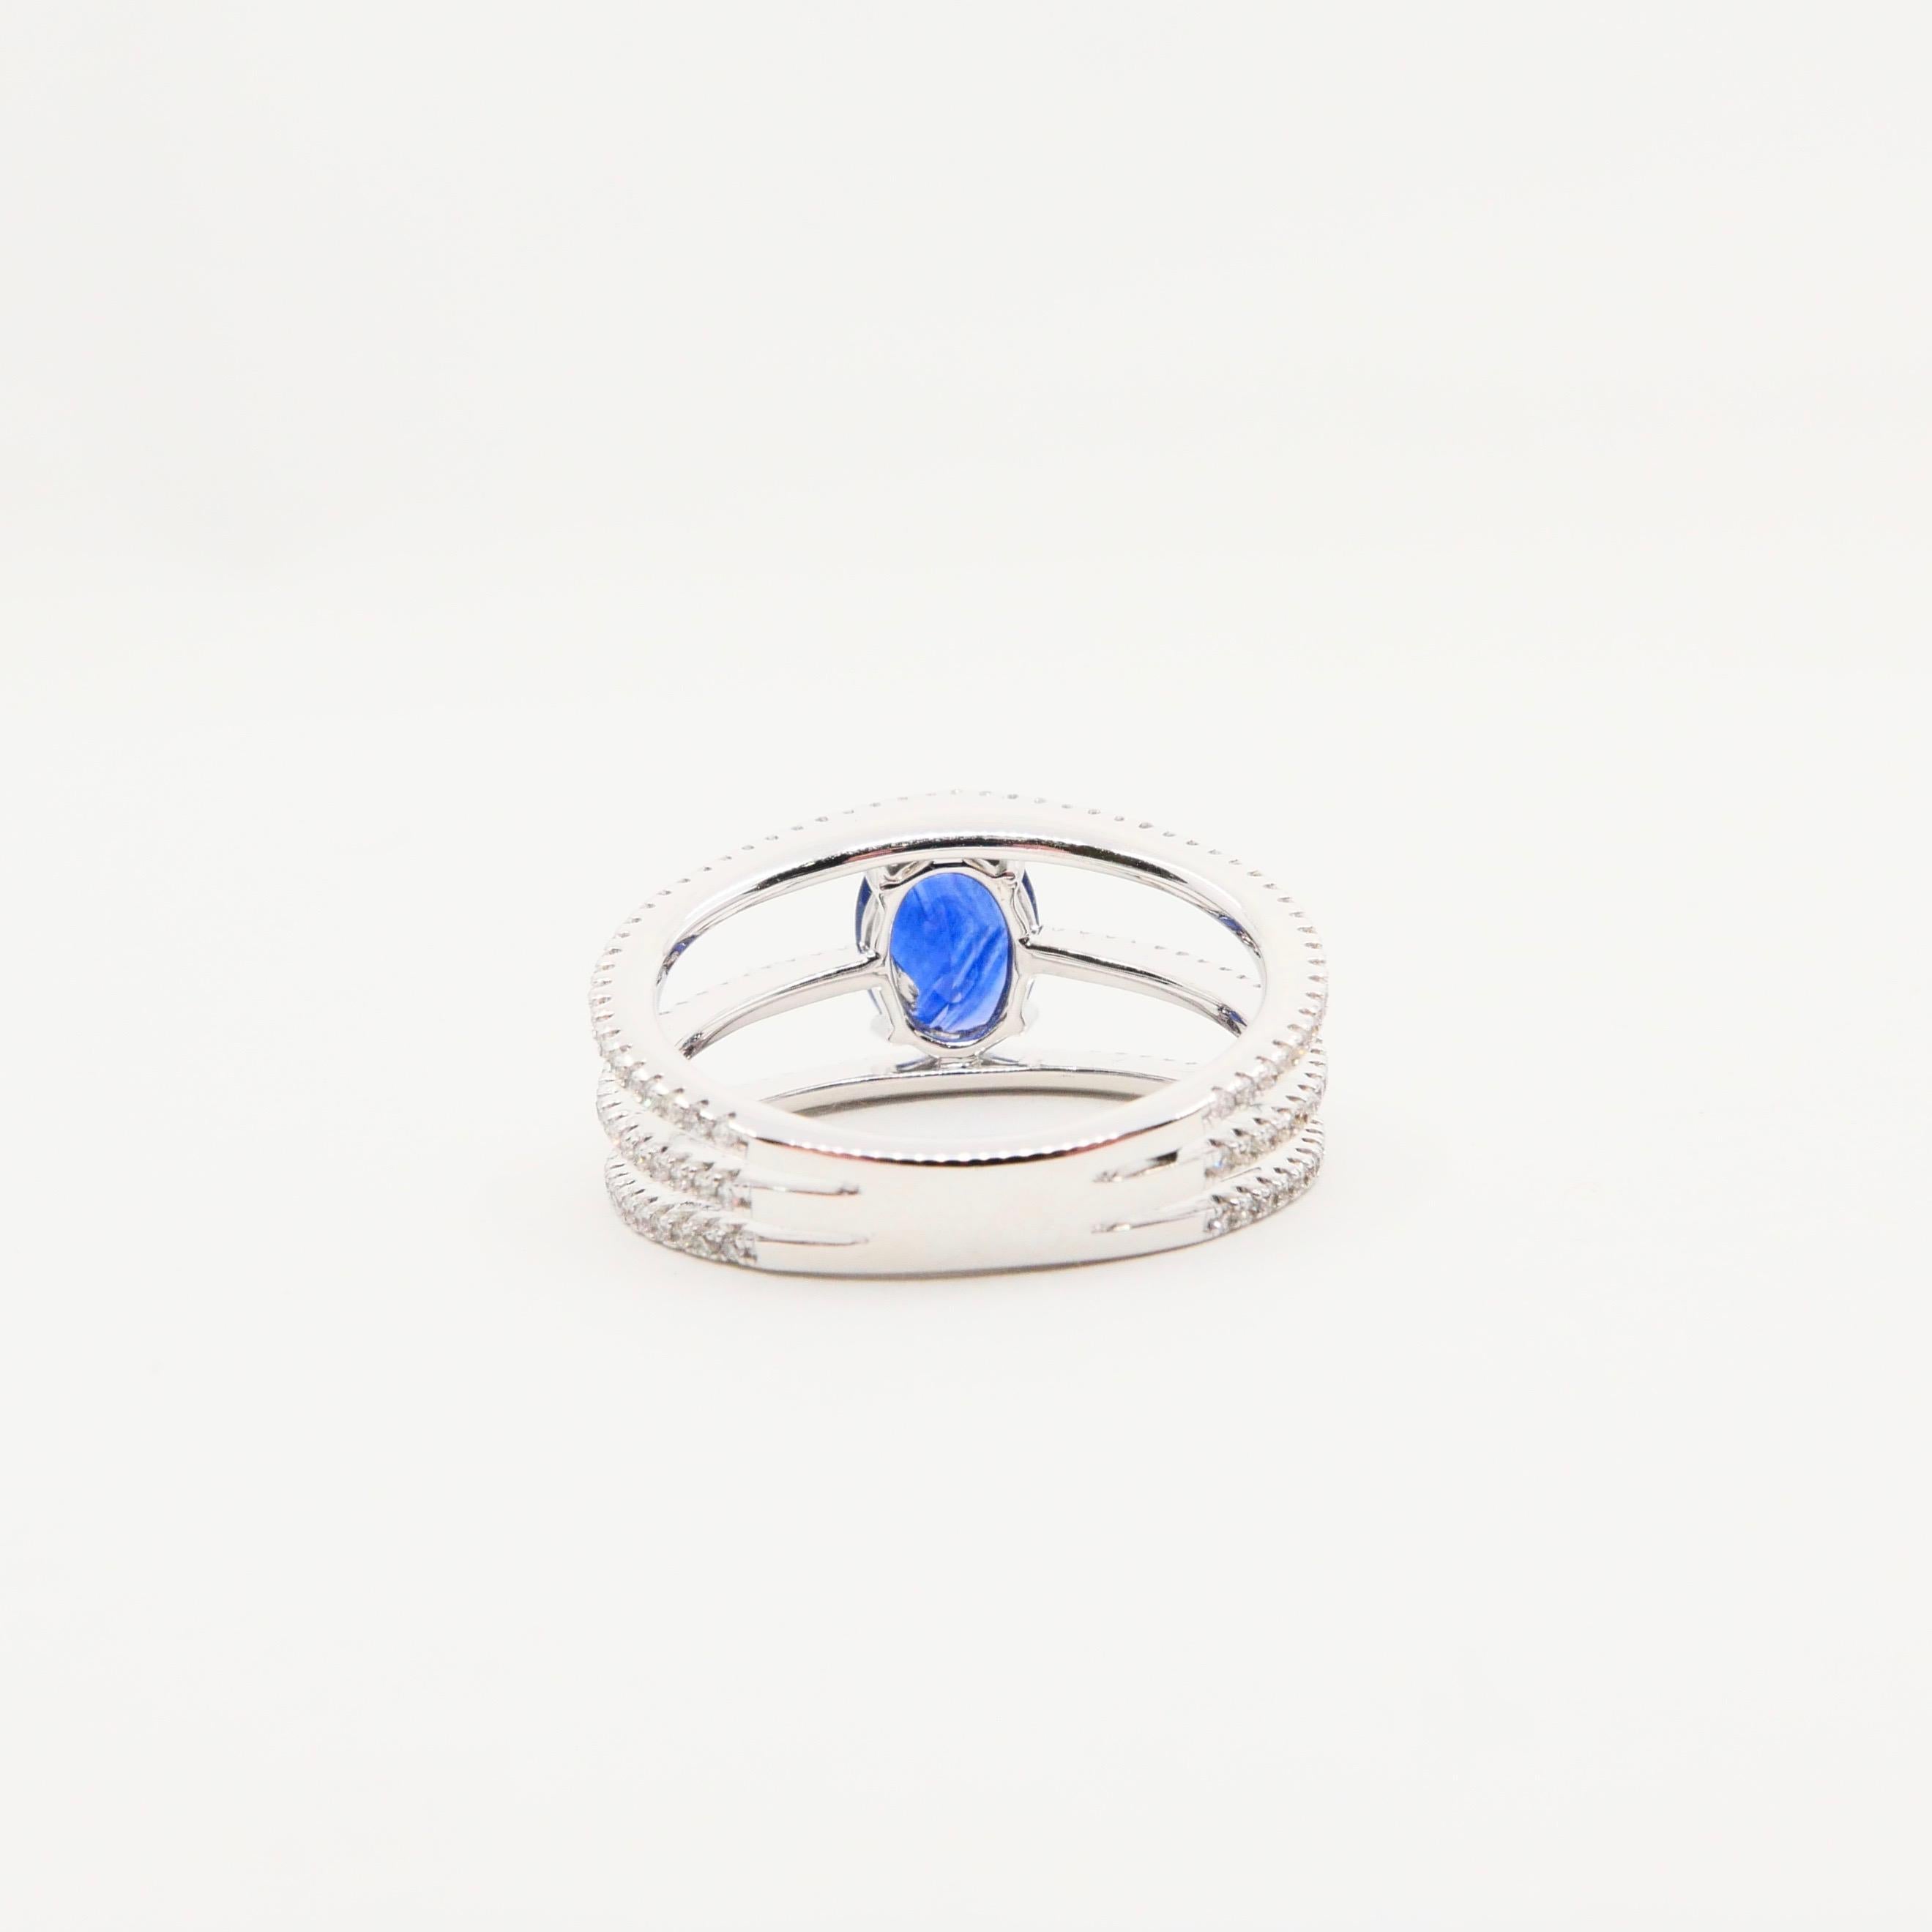 Blue Sapphire and Diamond Cocktail Ring, 3 Rows Design, 18 Karat White Gold For Sale 7